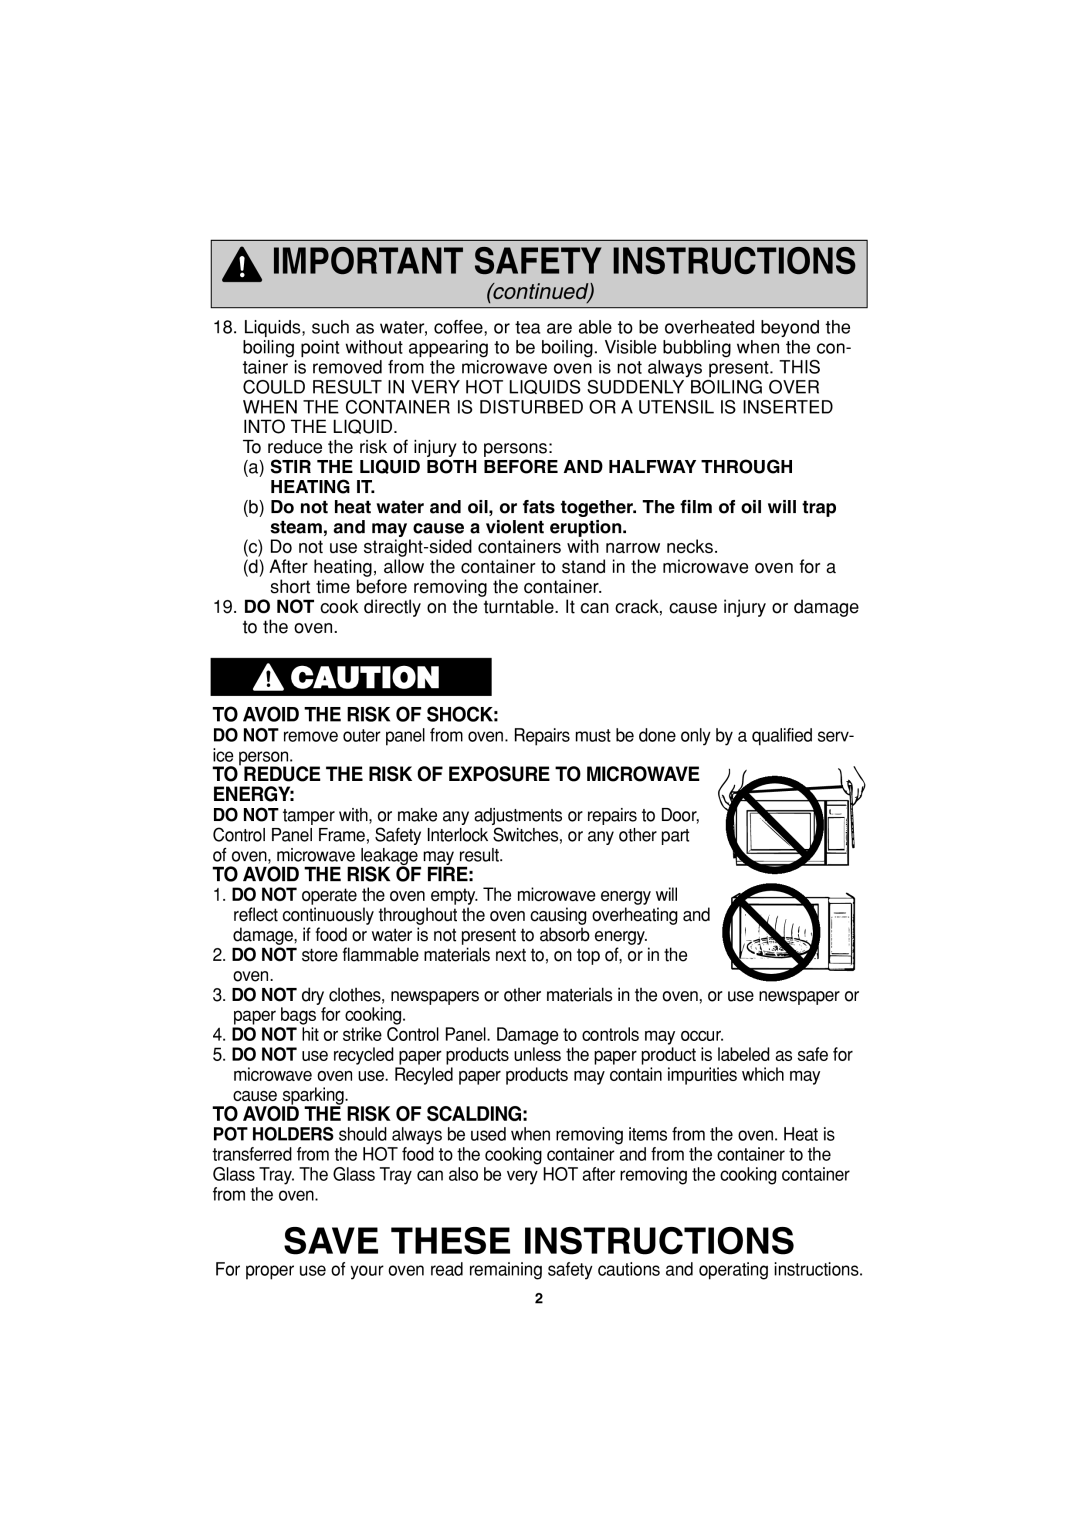 Panasonic NN-T793 Save These Instructions, continued, To Avoid The Risk Of Shock, Energy, To Avoid The Risk Of Fire 